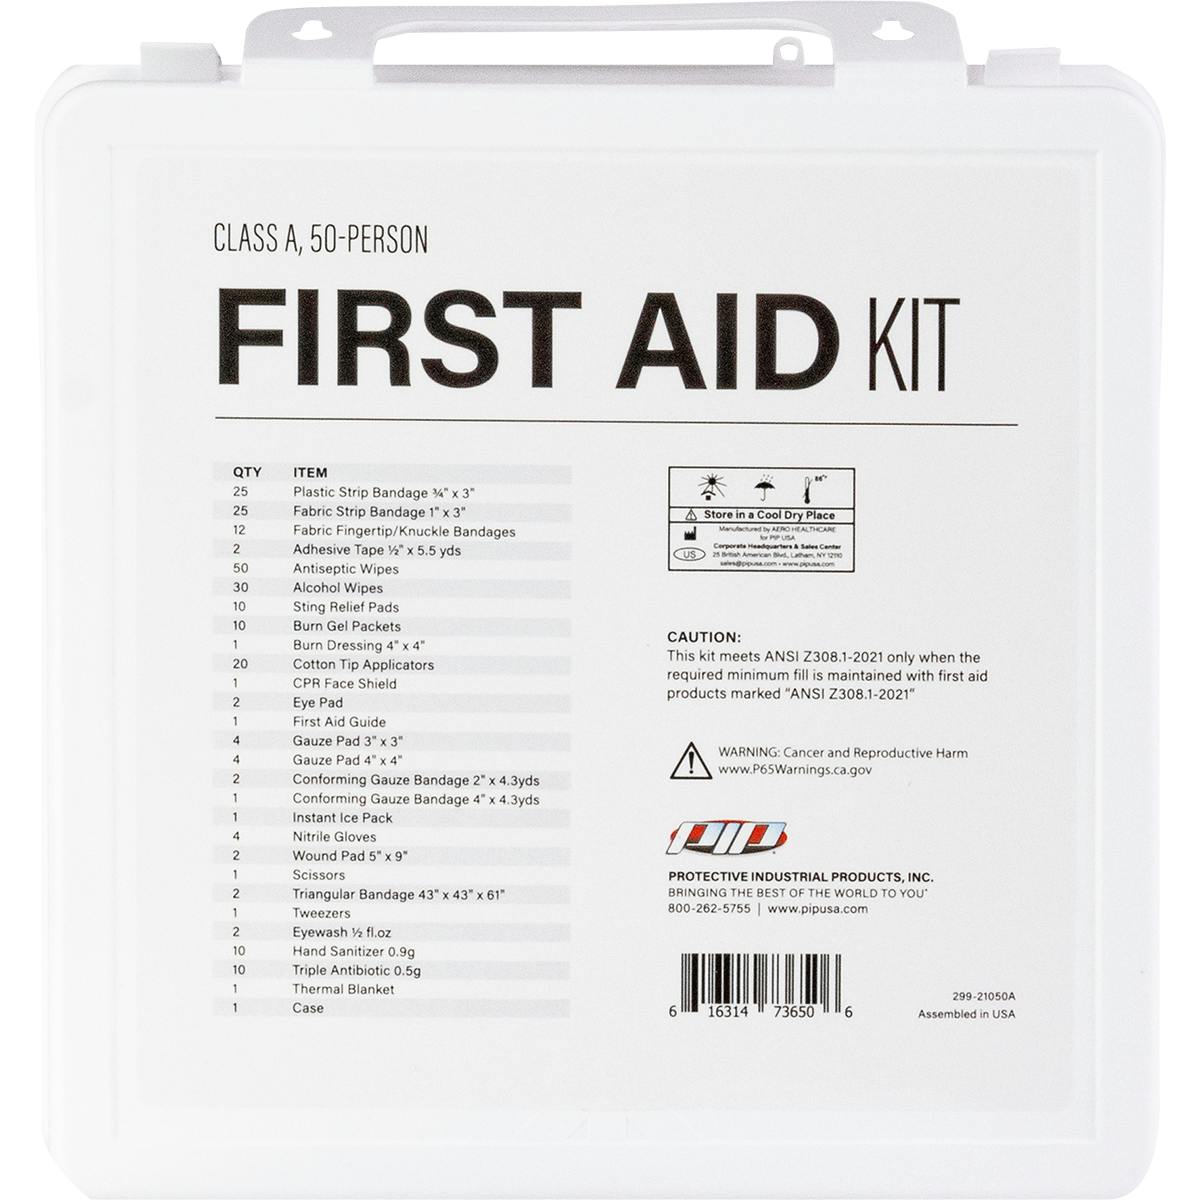 ANSI Class A Waterproof First Aid Kit - 50 Person, White (299-21050A) - KIT_0